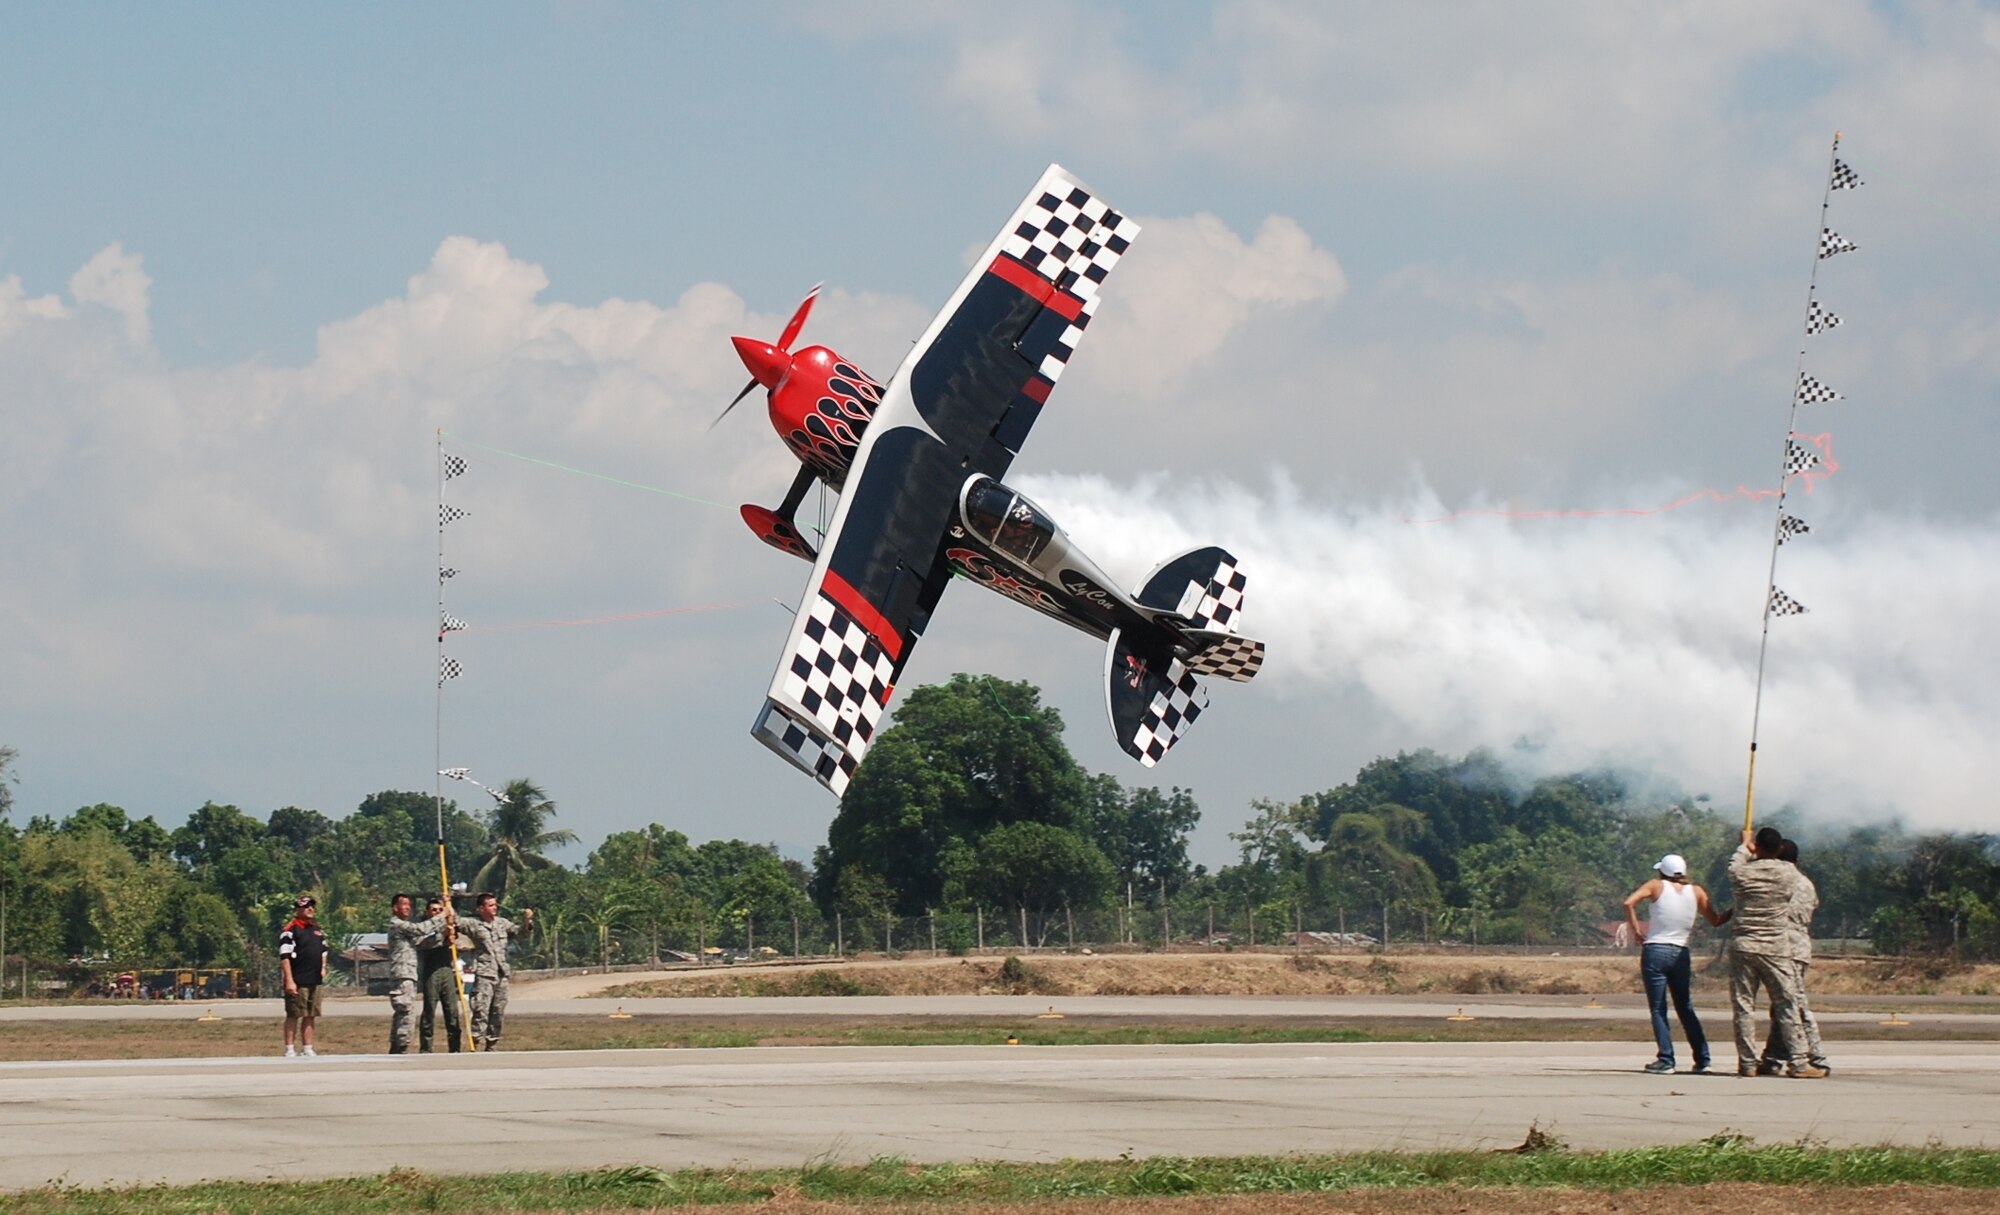 Aerial stunt performer Patty Wagstaff cuts ribbon while flying inverted as Honduran military, U.S. military and civilians assist at an air show June 12, 2011, at Colonel Armando Escalon Espinal Air Base, Honduras.  This annual event drew more than 10,000 spectators, raised money for a local civilian hospital and bolstered friendships between the military and civilian aviation community of the U.S. and Honduras.